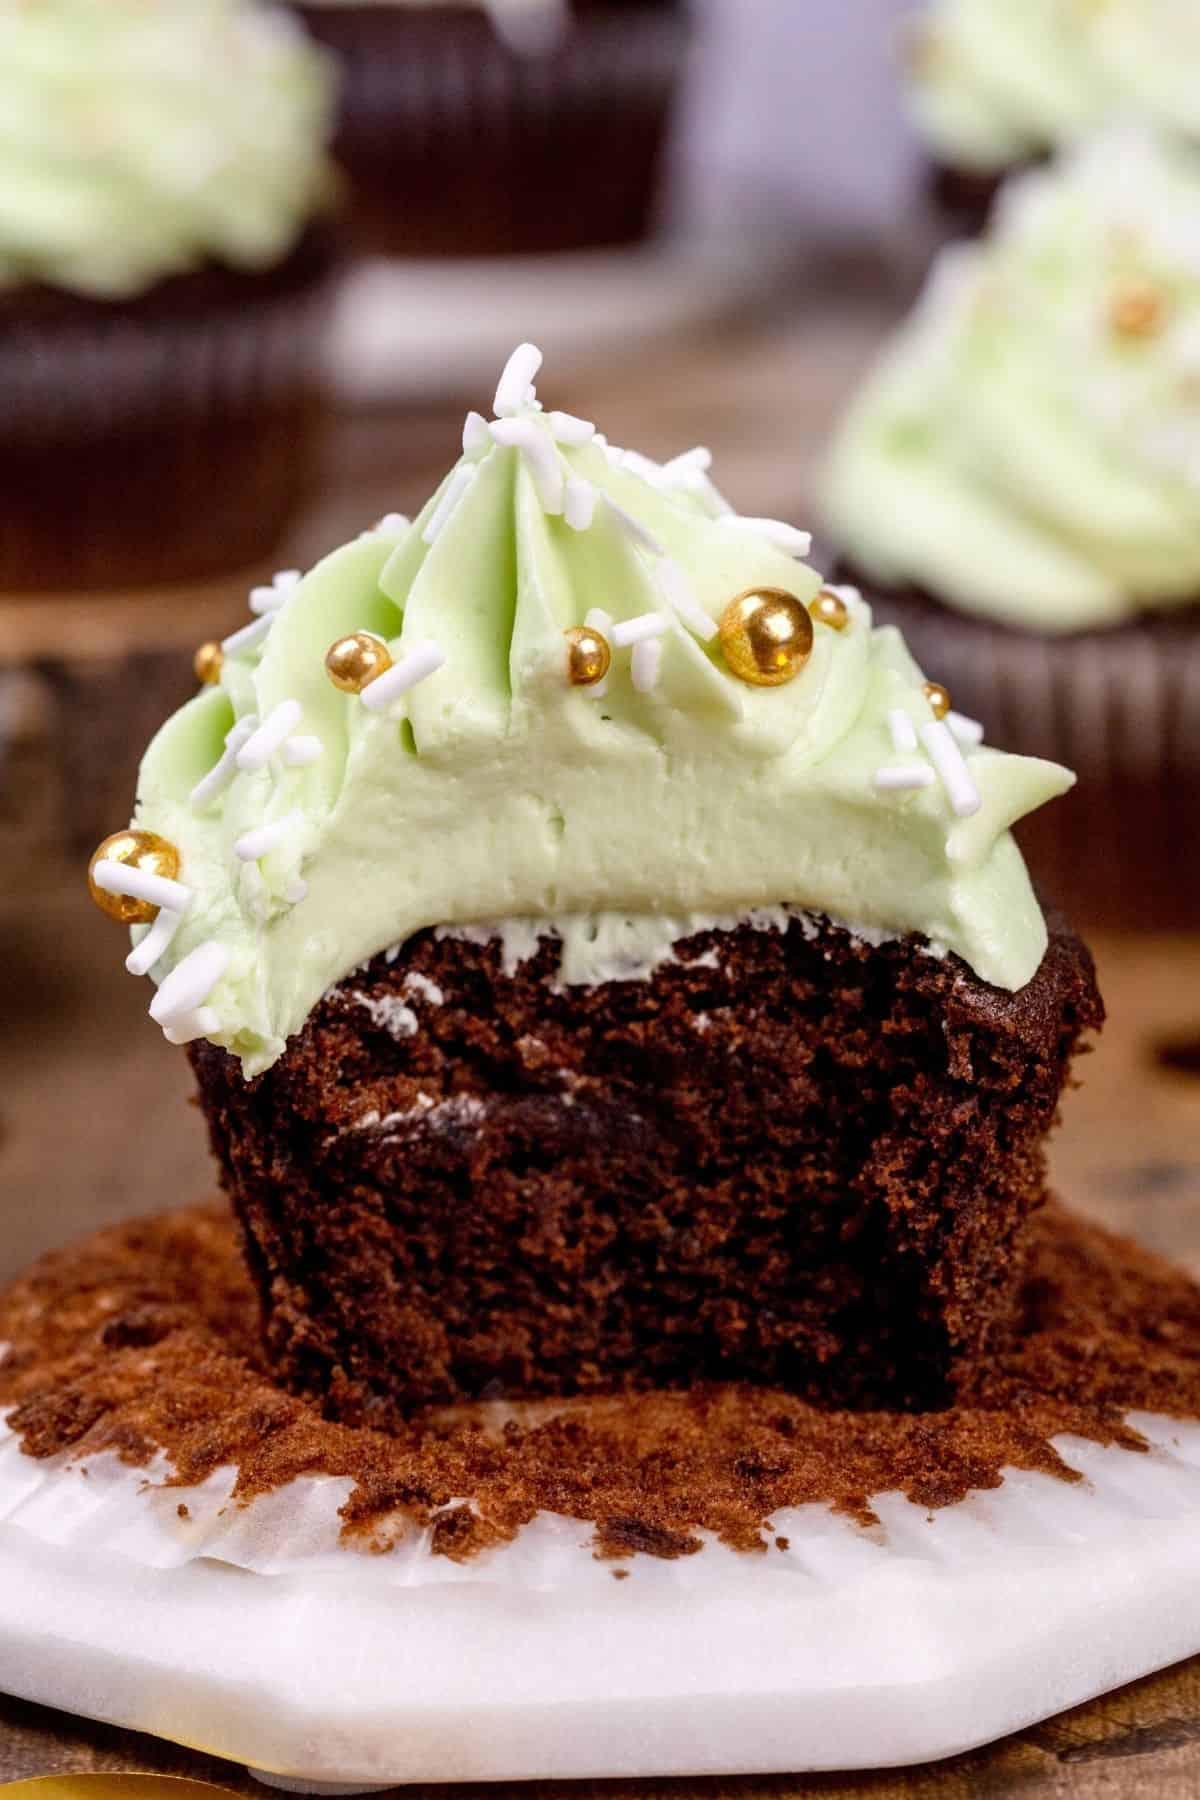 Closeup of a mint chocolate cupcake with a bite taken out of it. You can see the soft and fluffy inside of the cupcake.